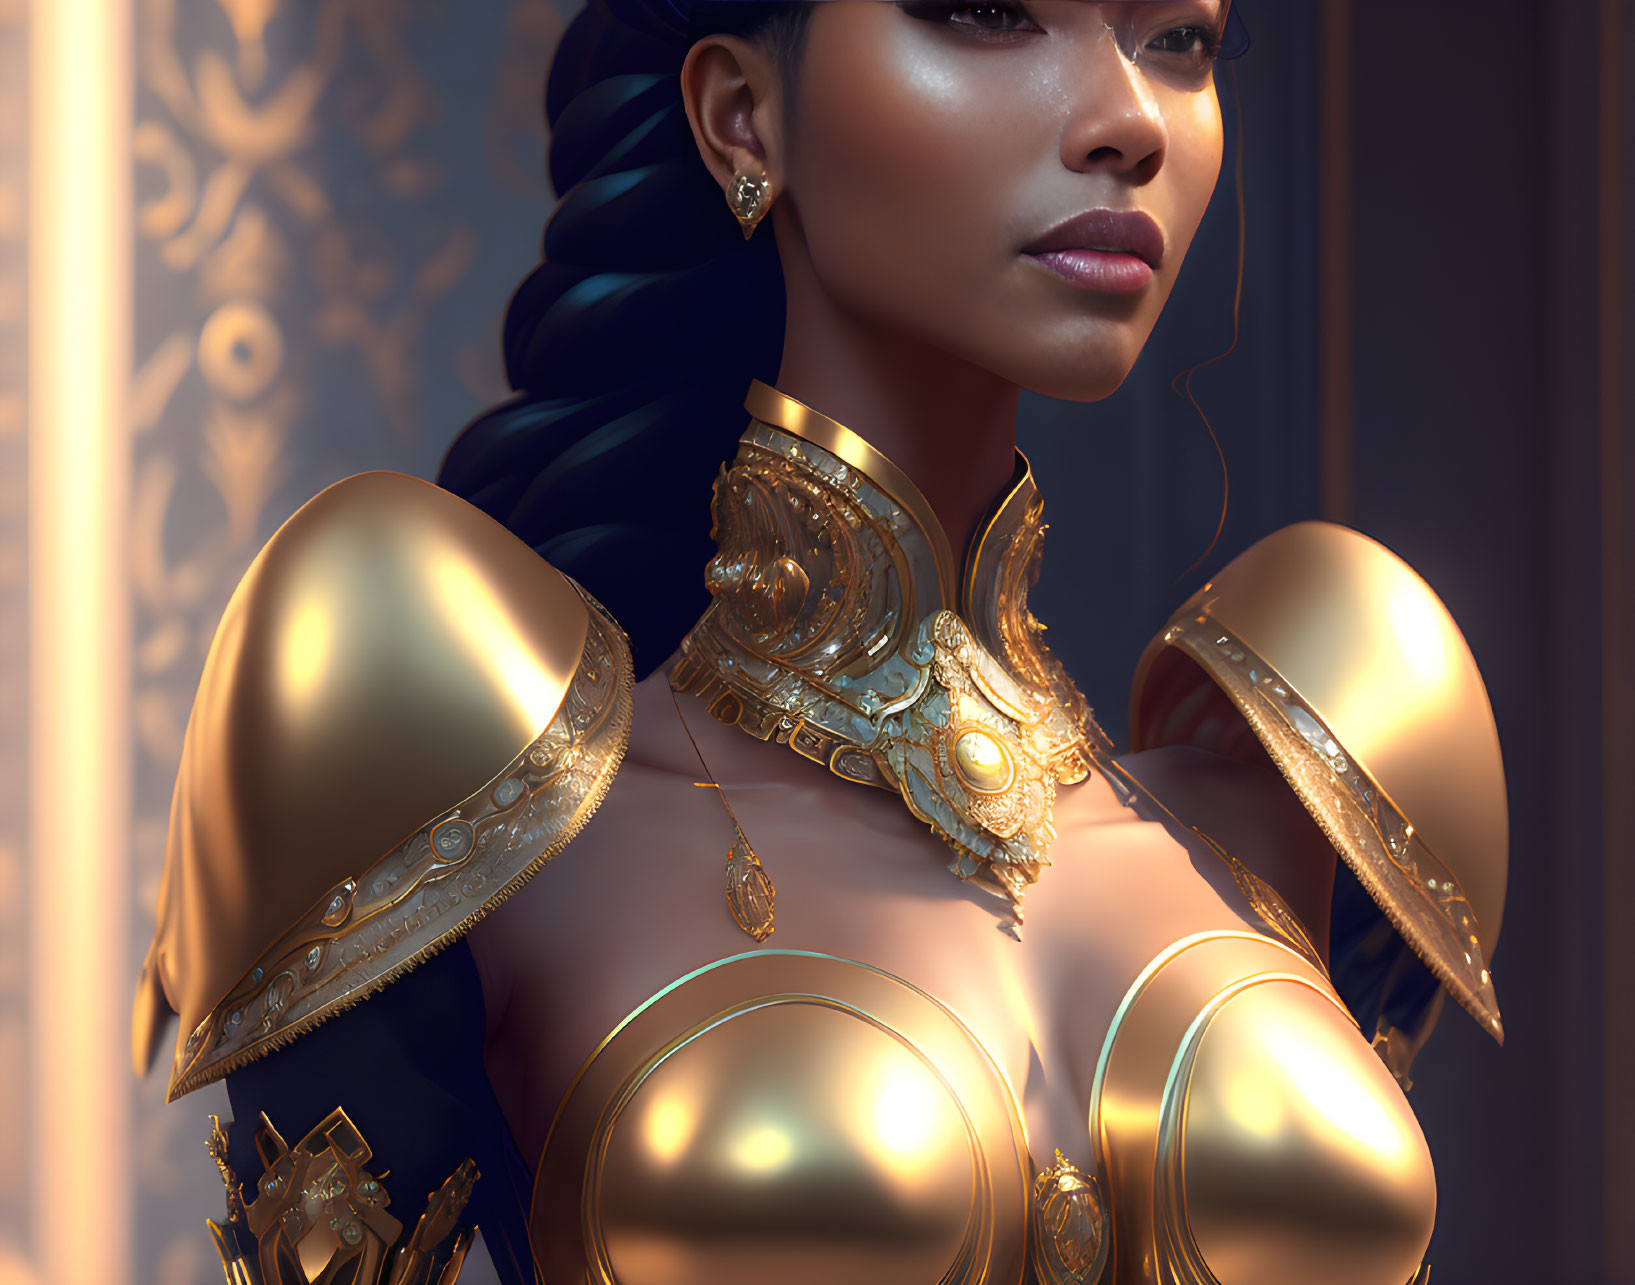 Detailed digital artwork of woman in golden ornate armor with intricate designs and focus on profile and shoulder plate